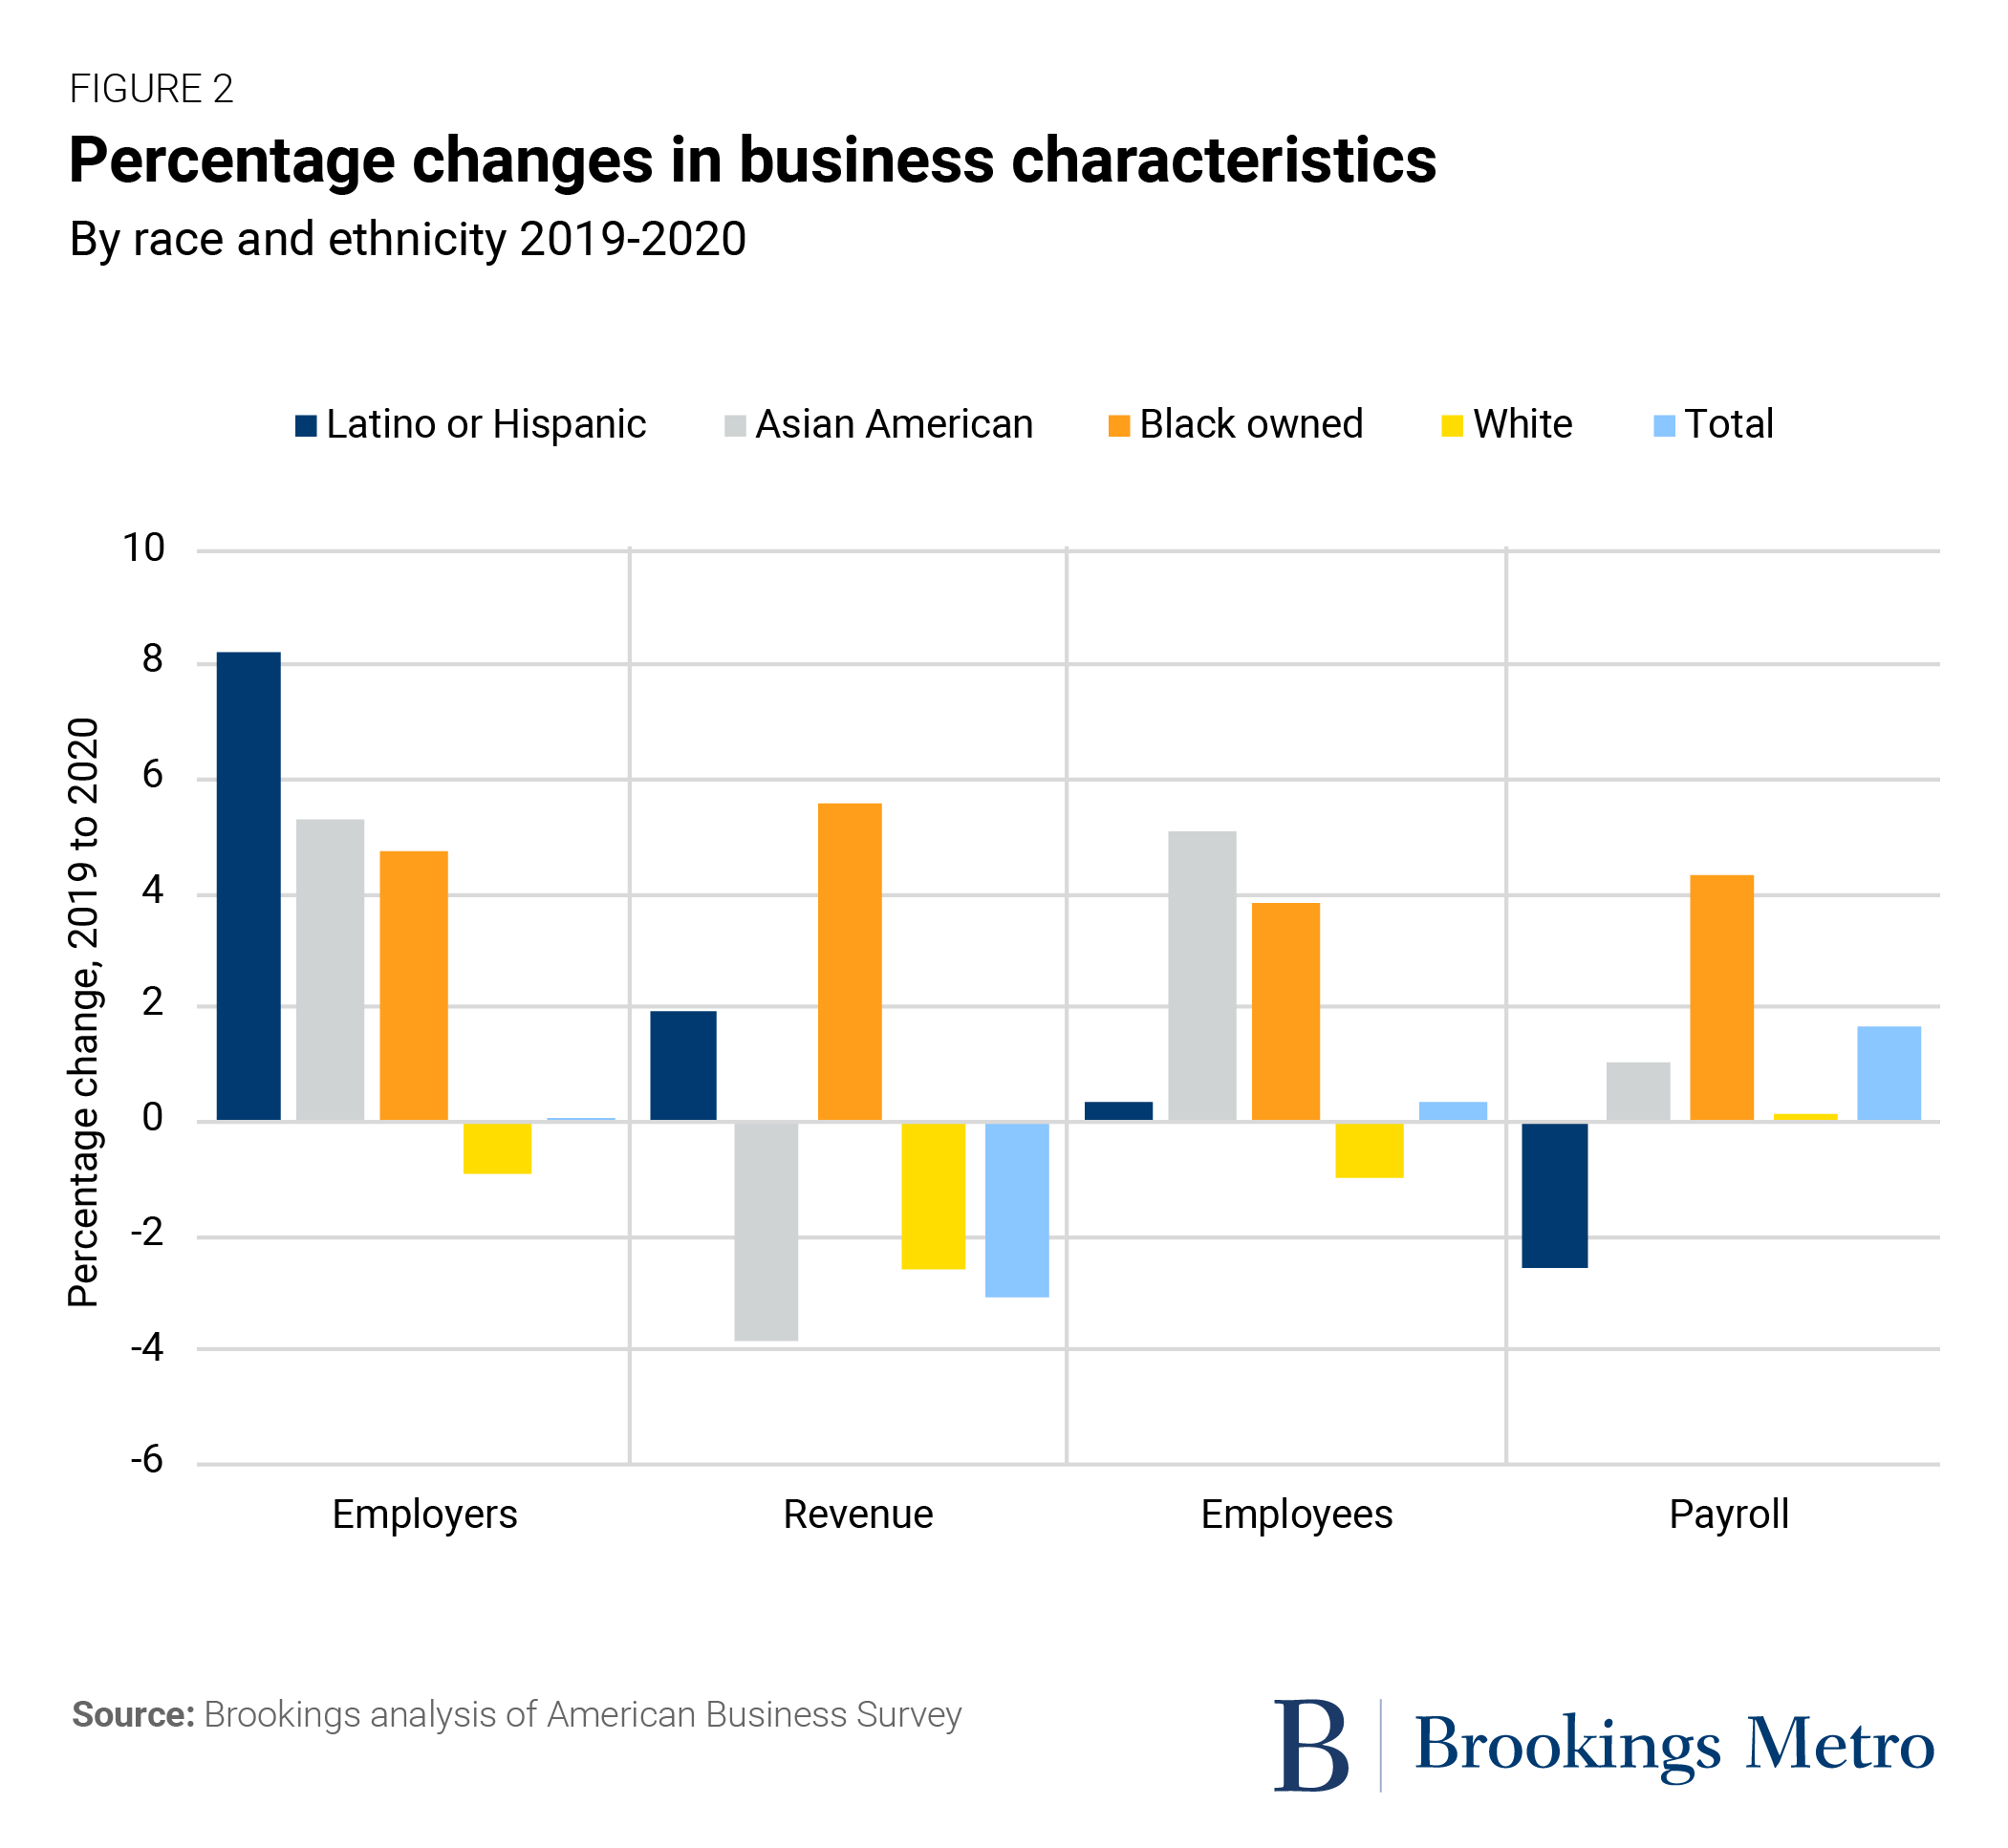 Figure 2: Percentage changes in business characteristics by race and ethnicity, 2019 – 2020